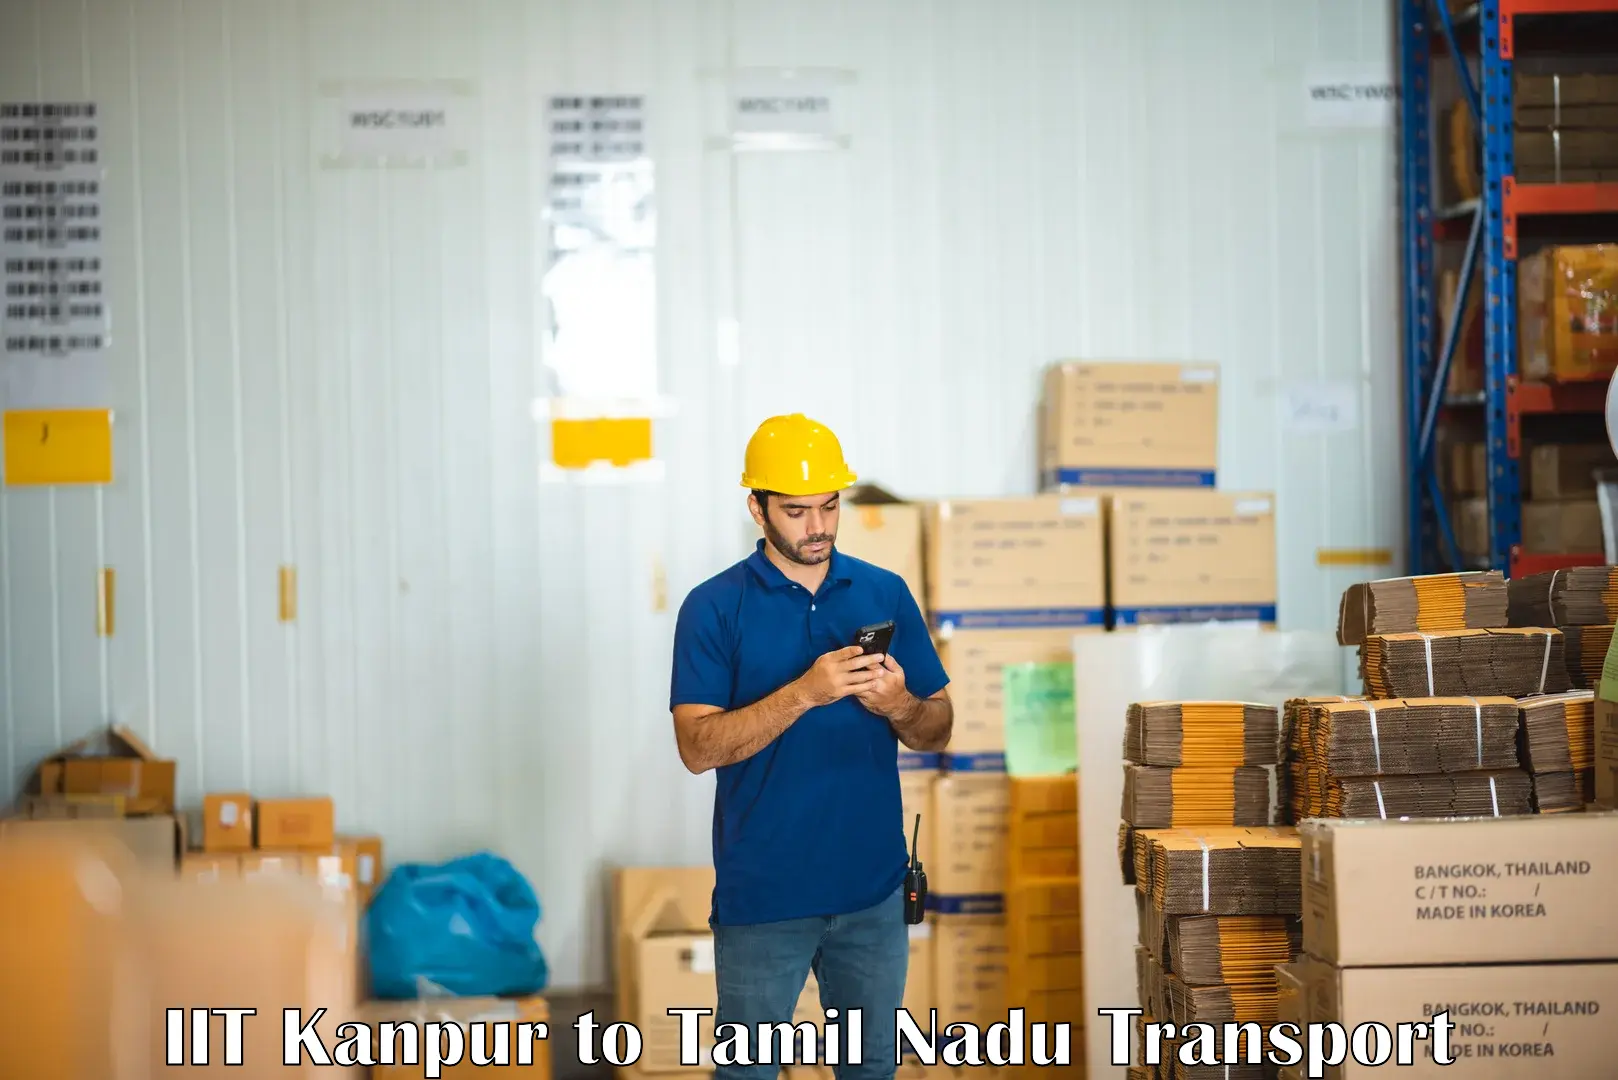 Parcel transport services IIT Kanpur to Chennai Port